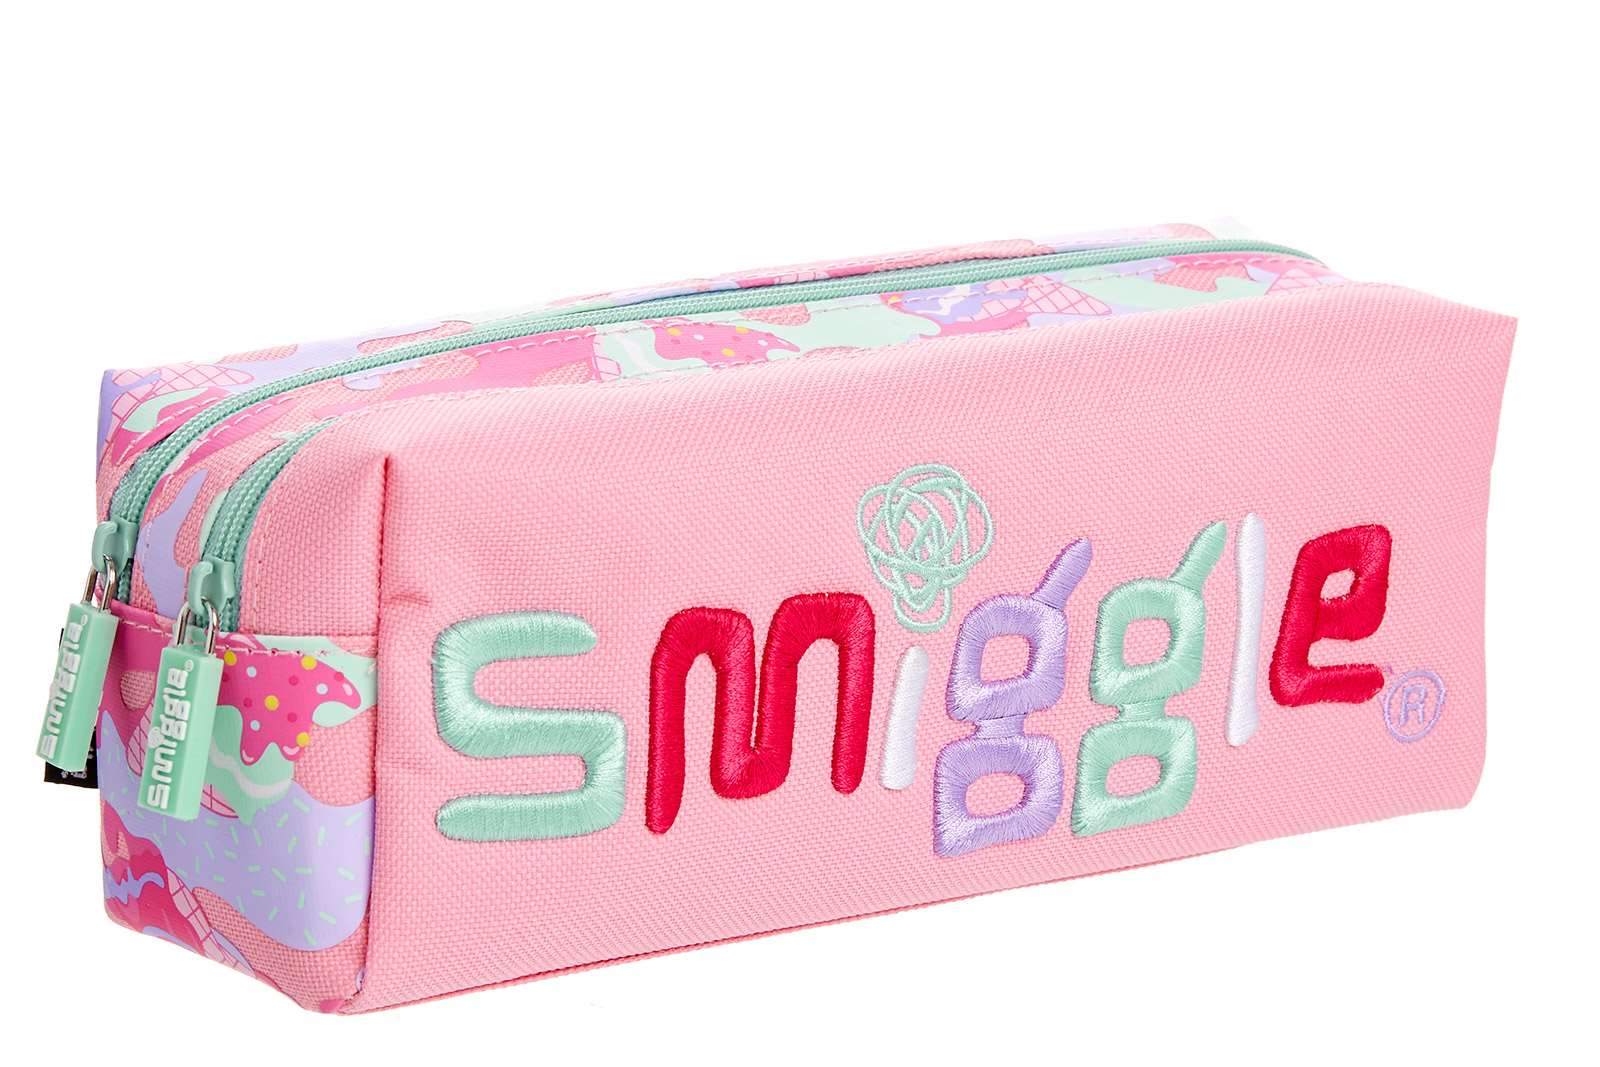 Smiggle pencil cases are always popular